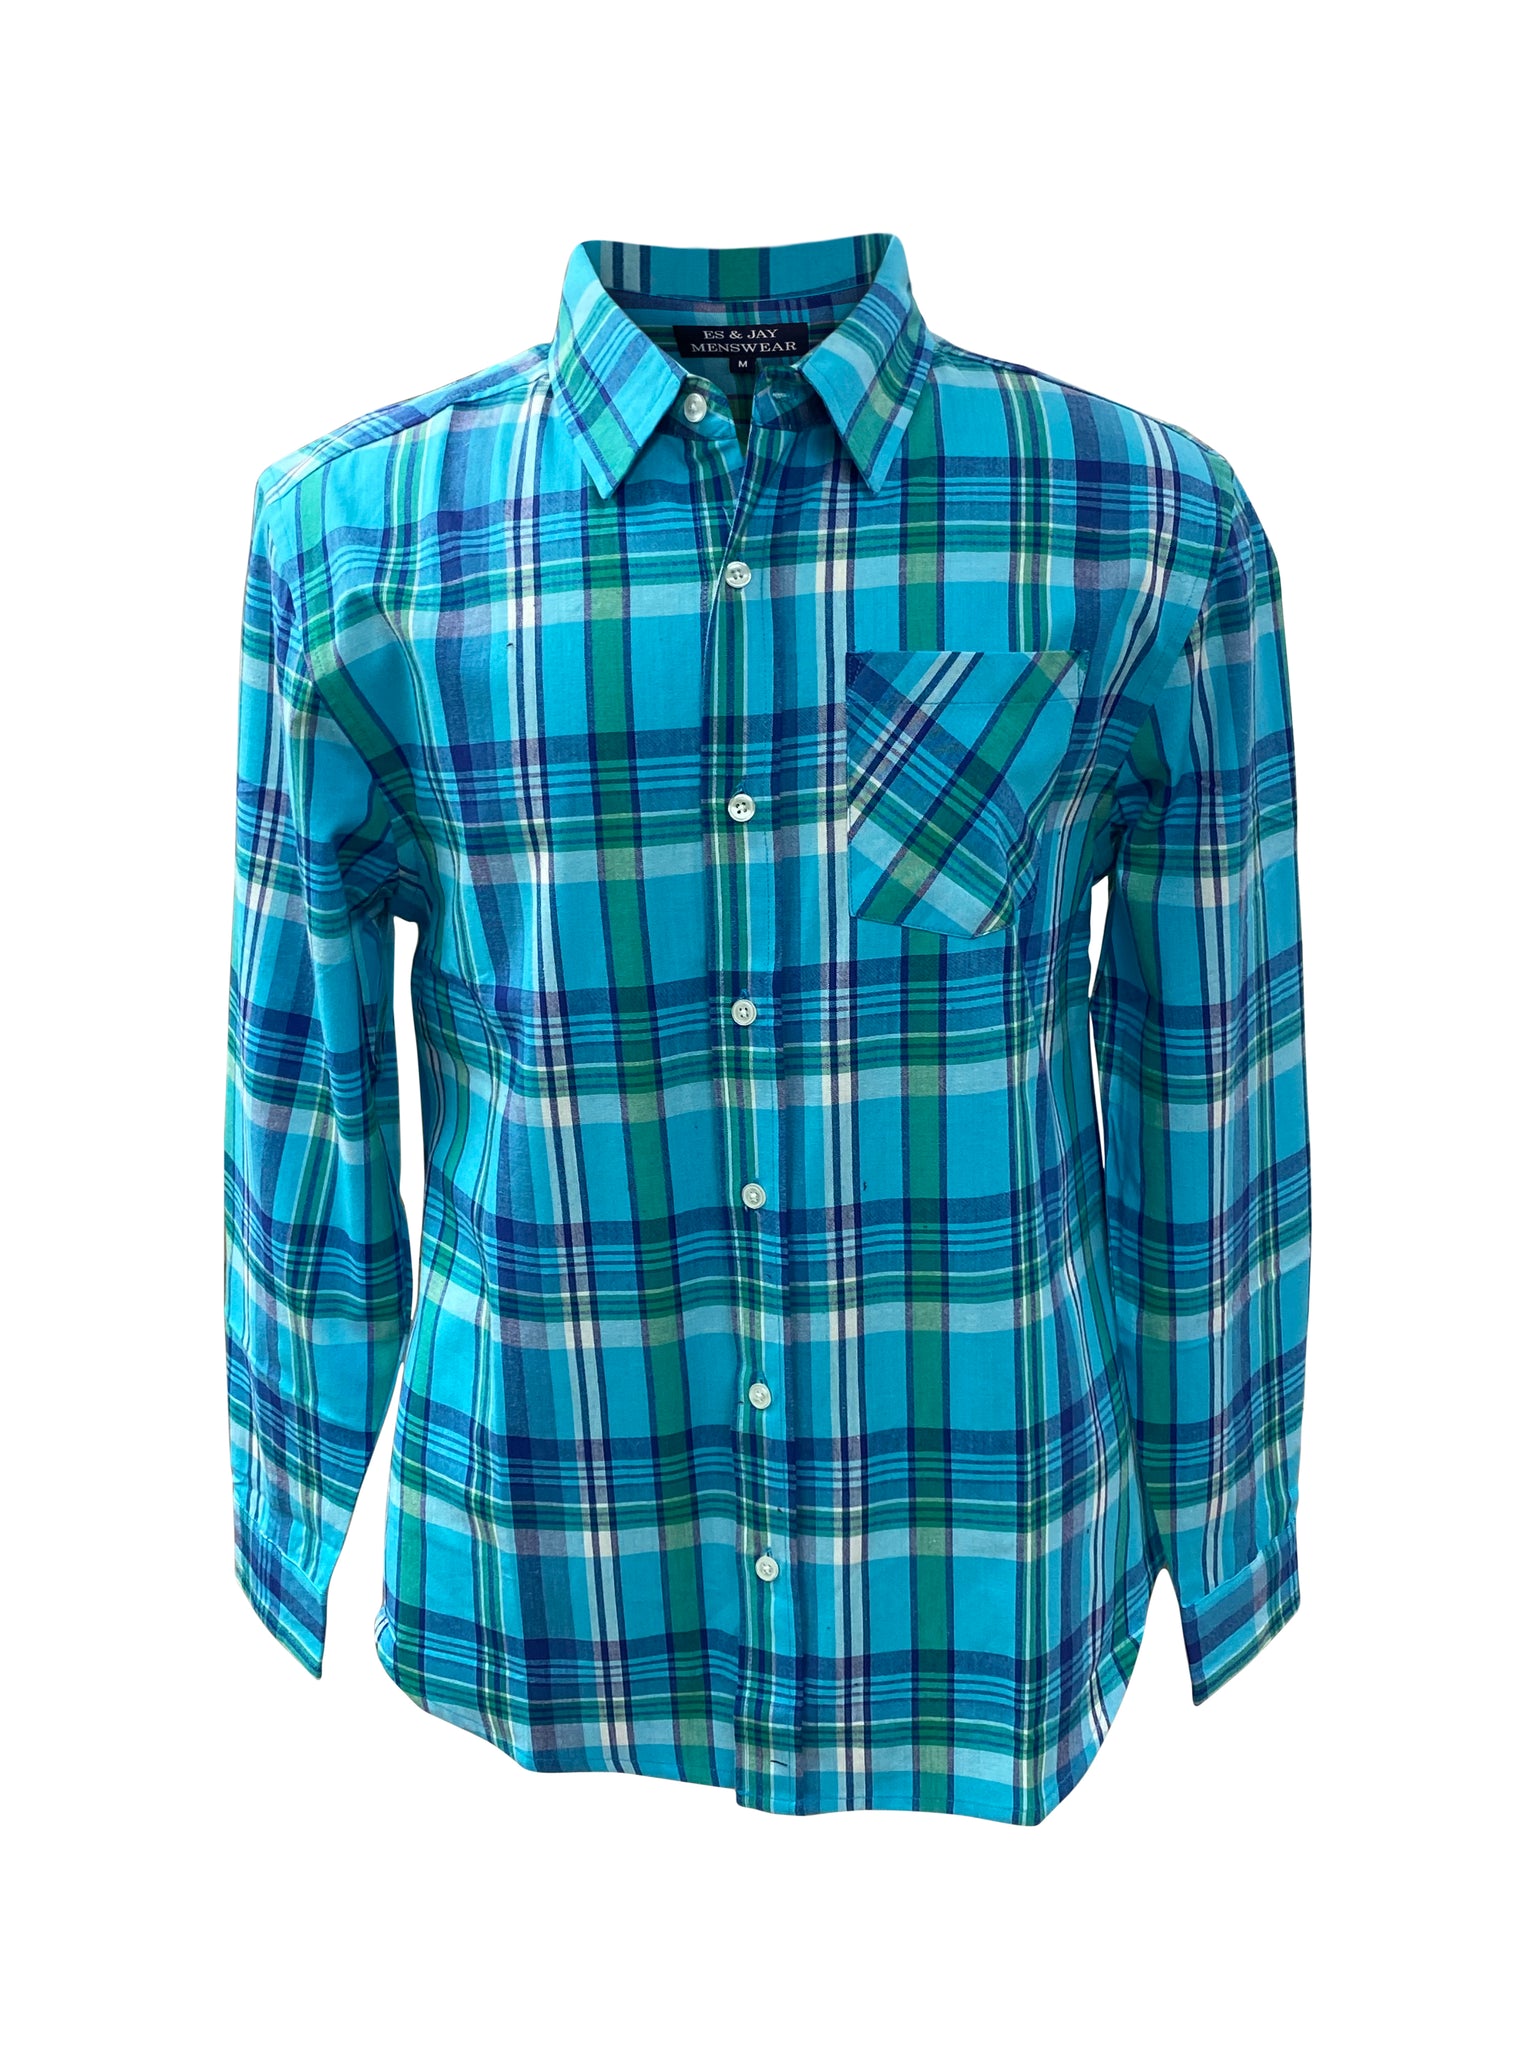 Long Sleeve Men's Indian Madras Check Shirt in cotton. Blue Style 3029 -  Stylish Shirley/Es&Jay Menswear